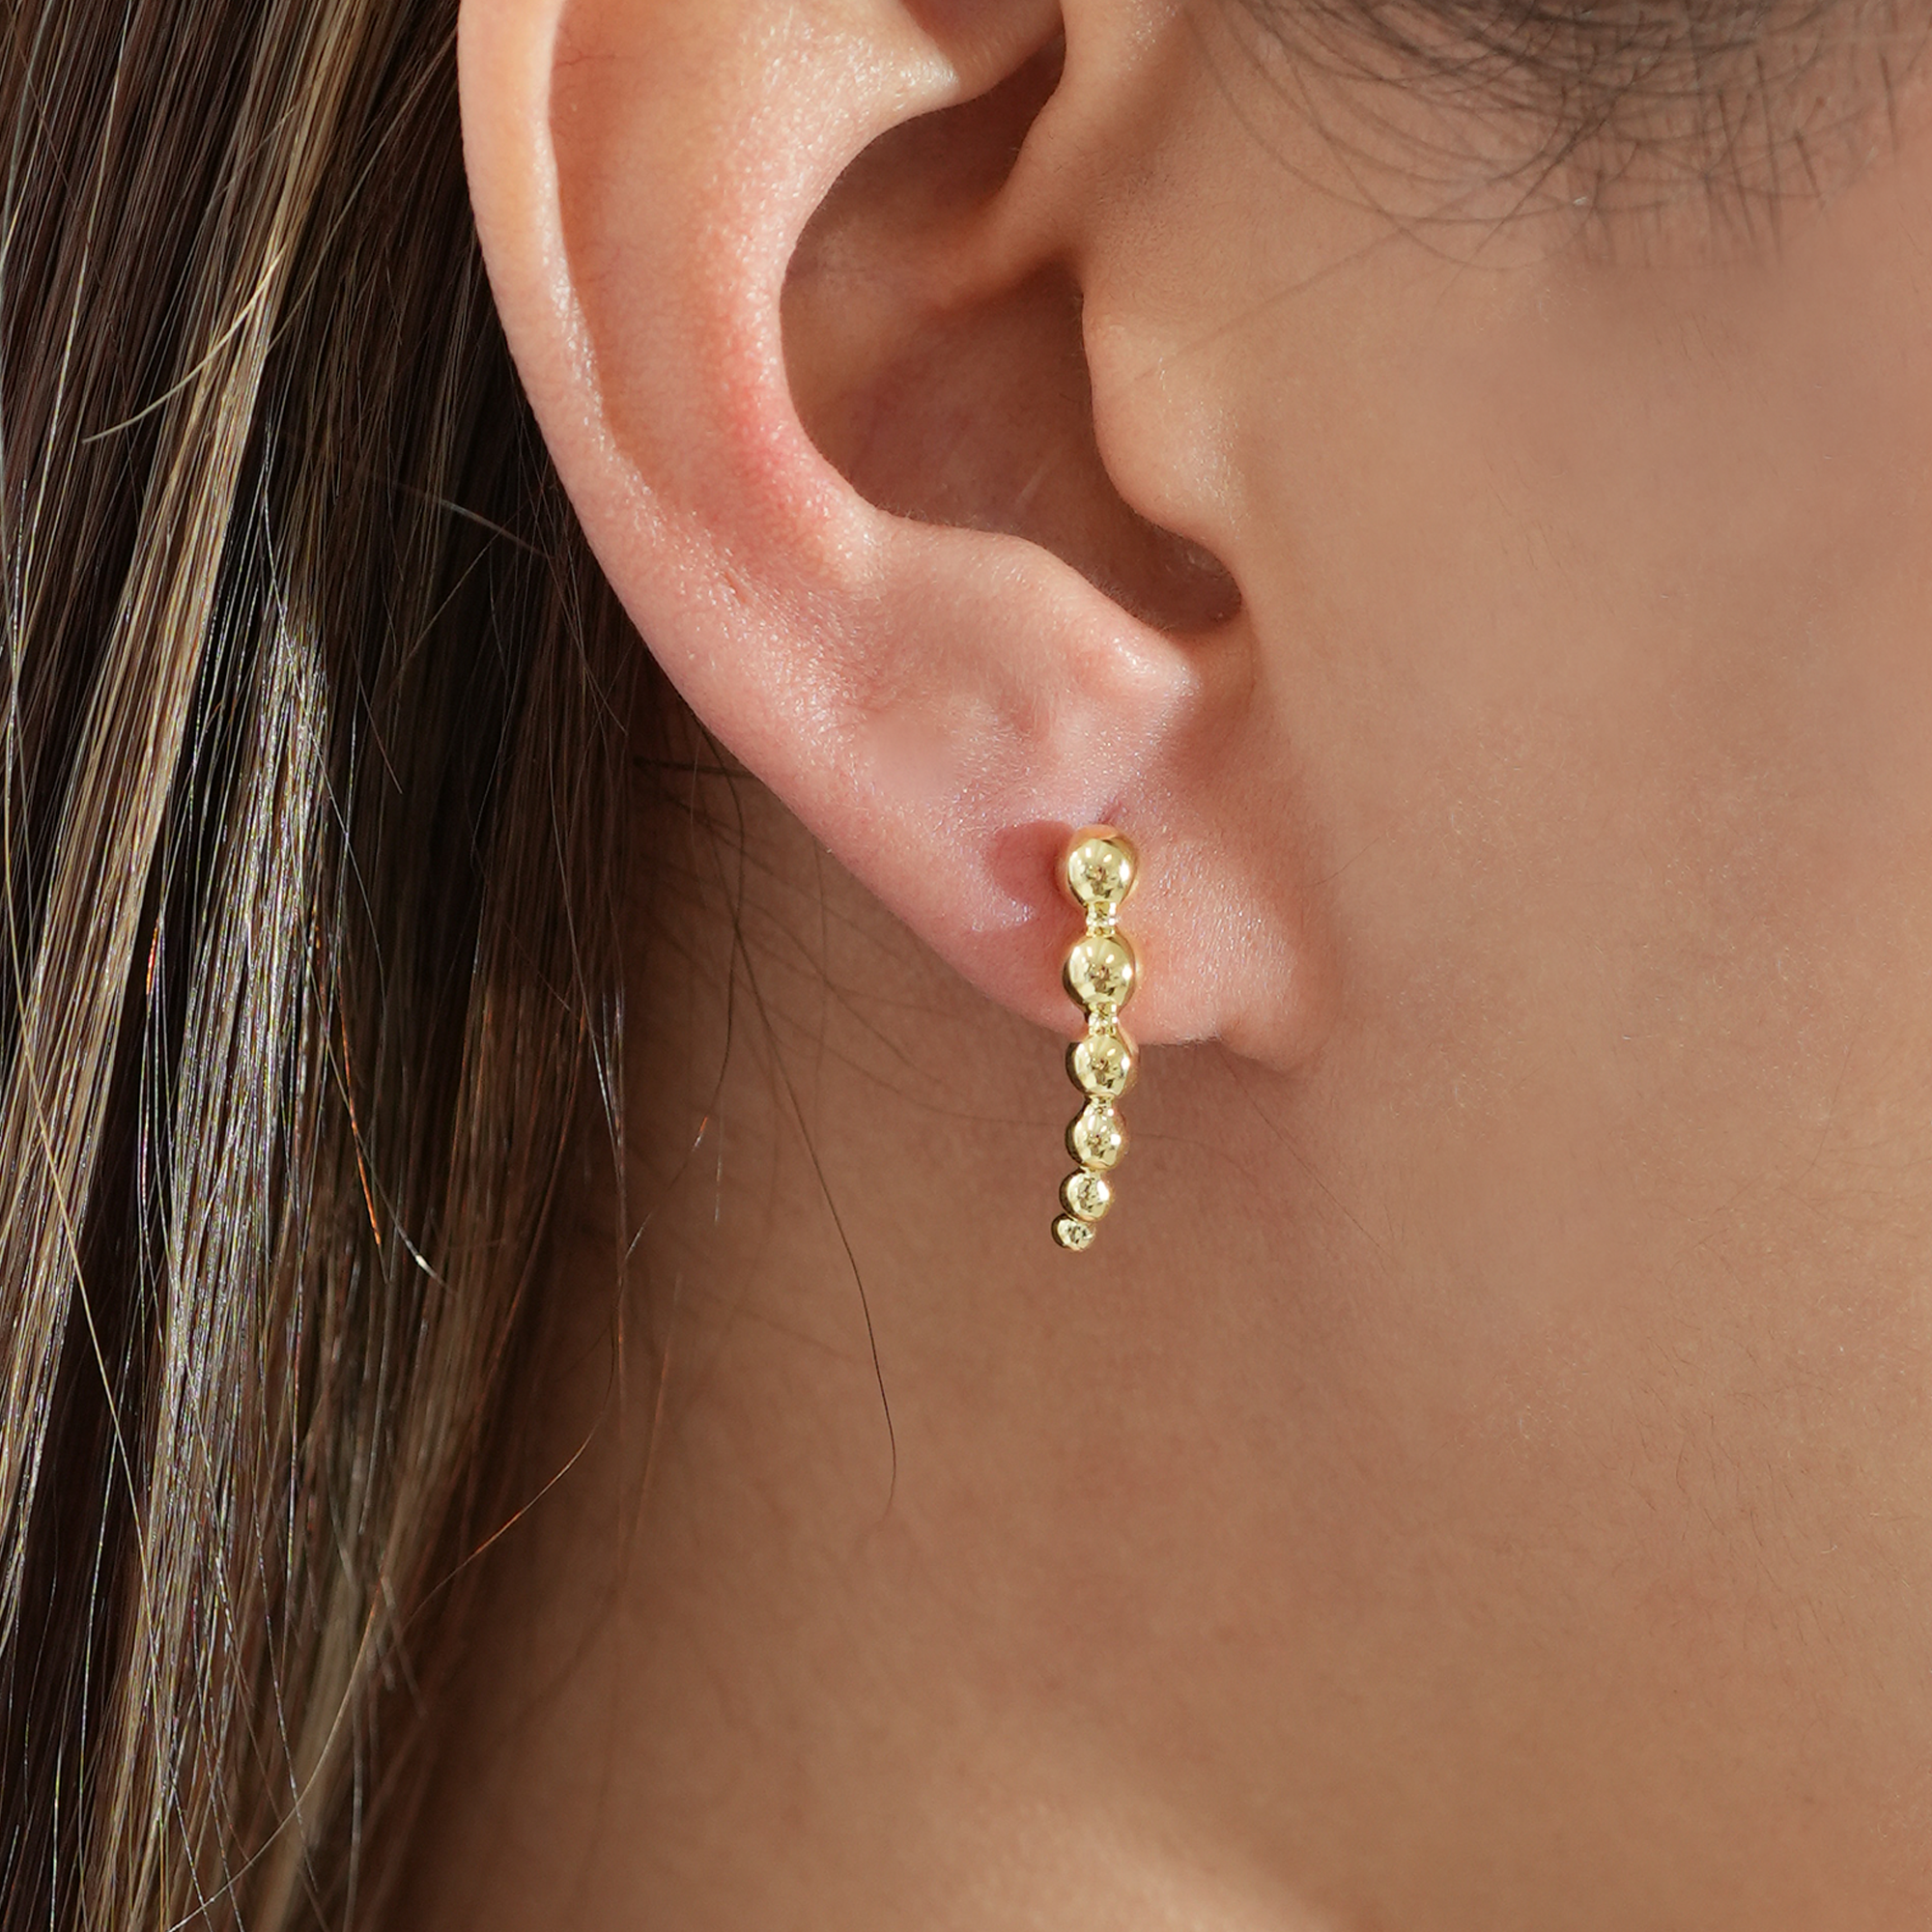 THE GRADUATED BALL EARRING